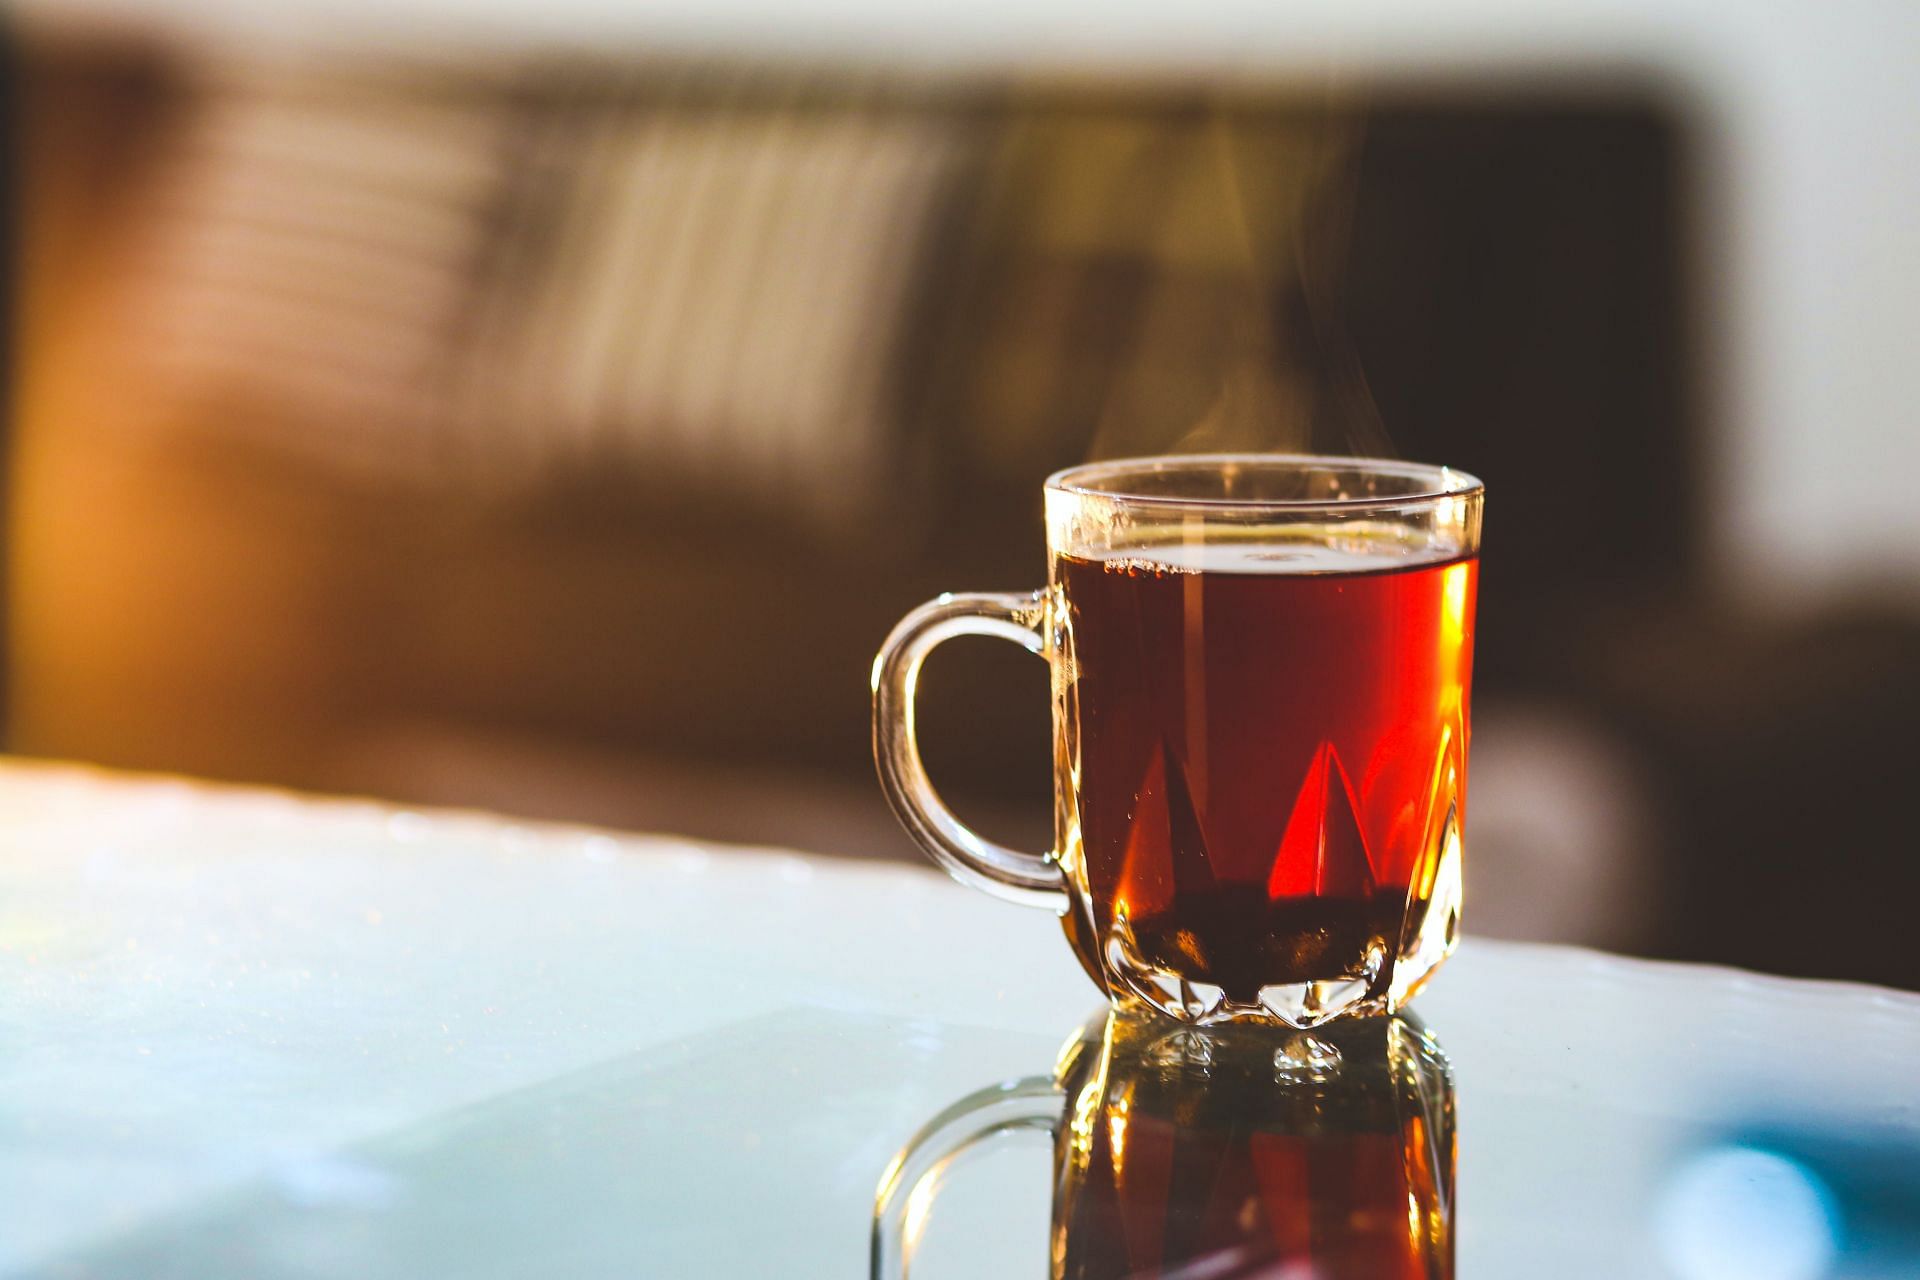 Importance of wormwood tea (image sourced via Pexels / Photo by ahmed aqtai)